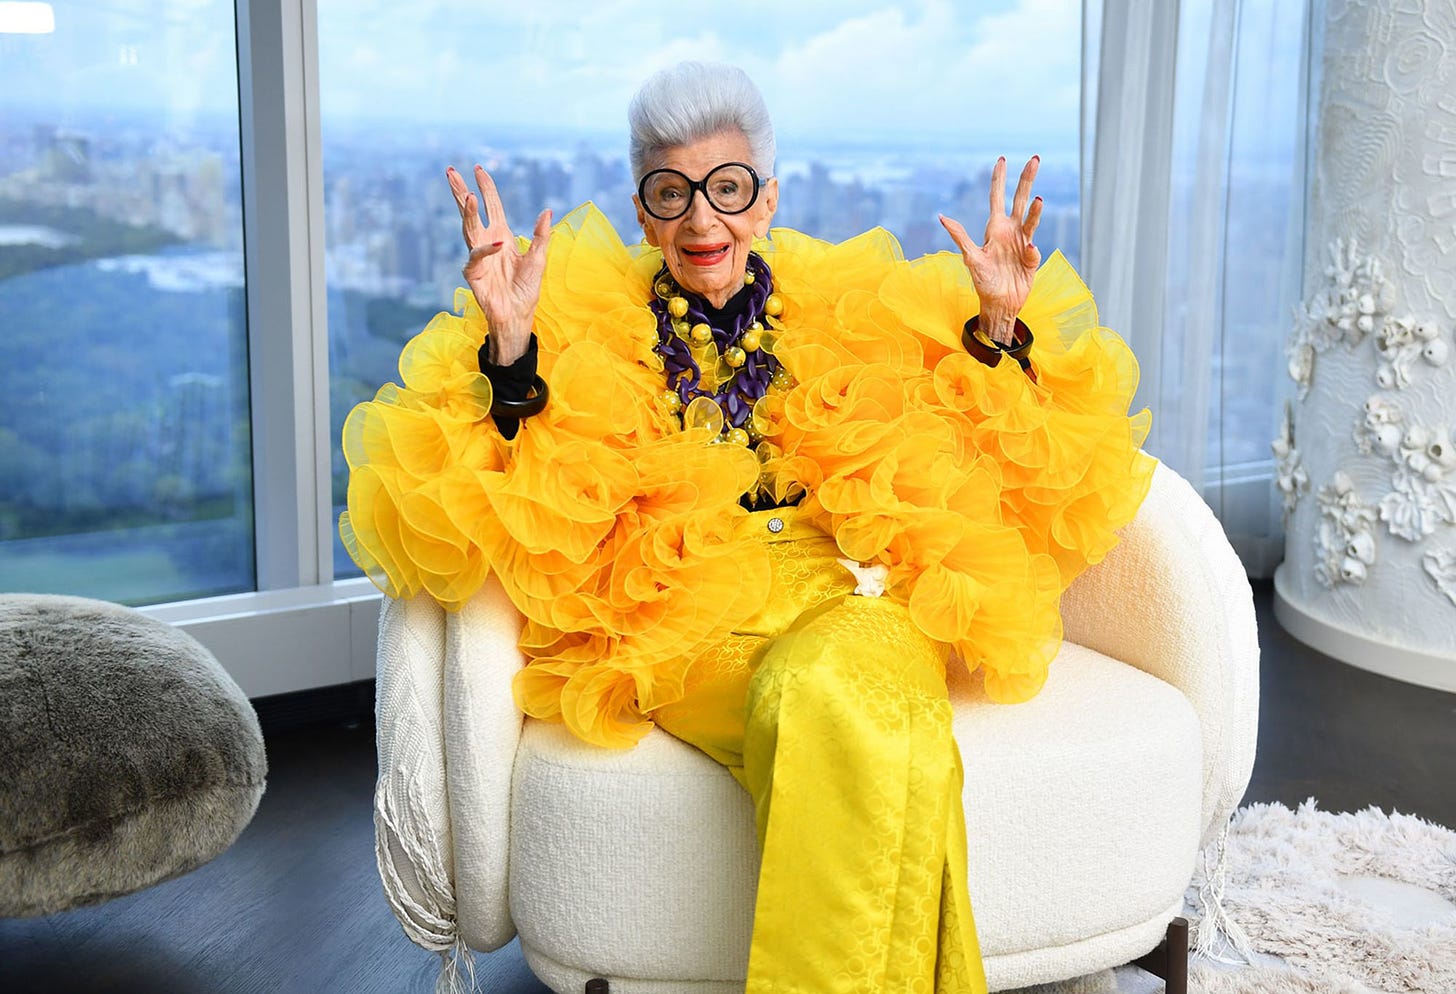 Interior designer, model and style icon Iris Apfel at her 100th birthday party in New York City in 2021.